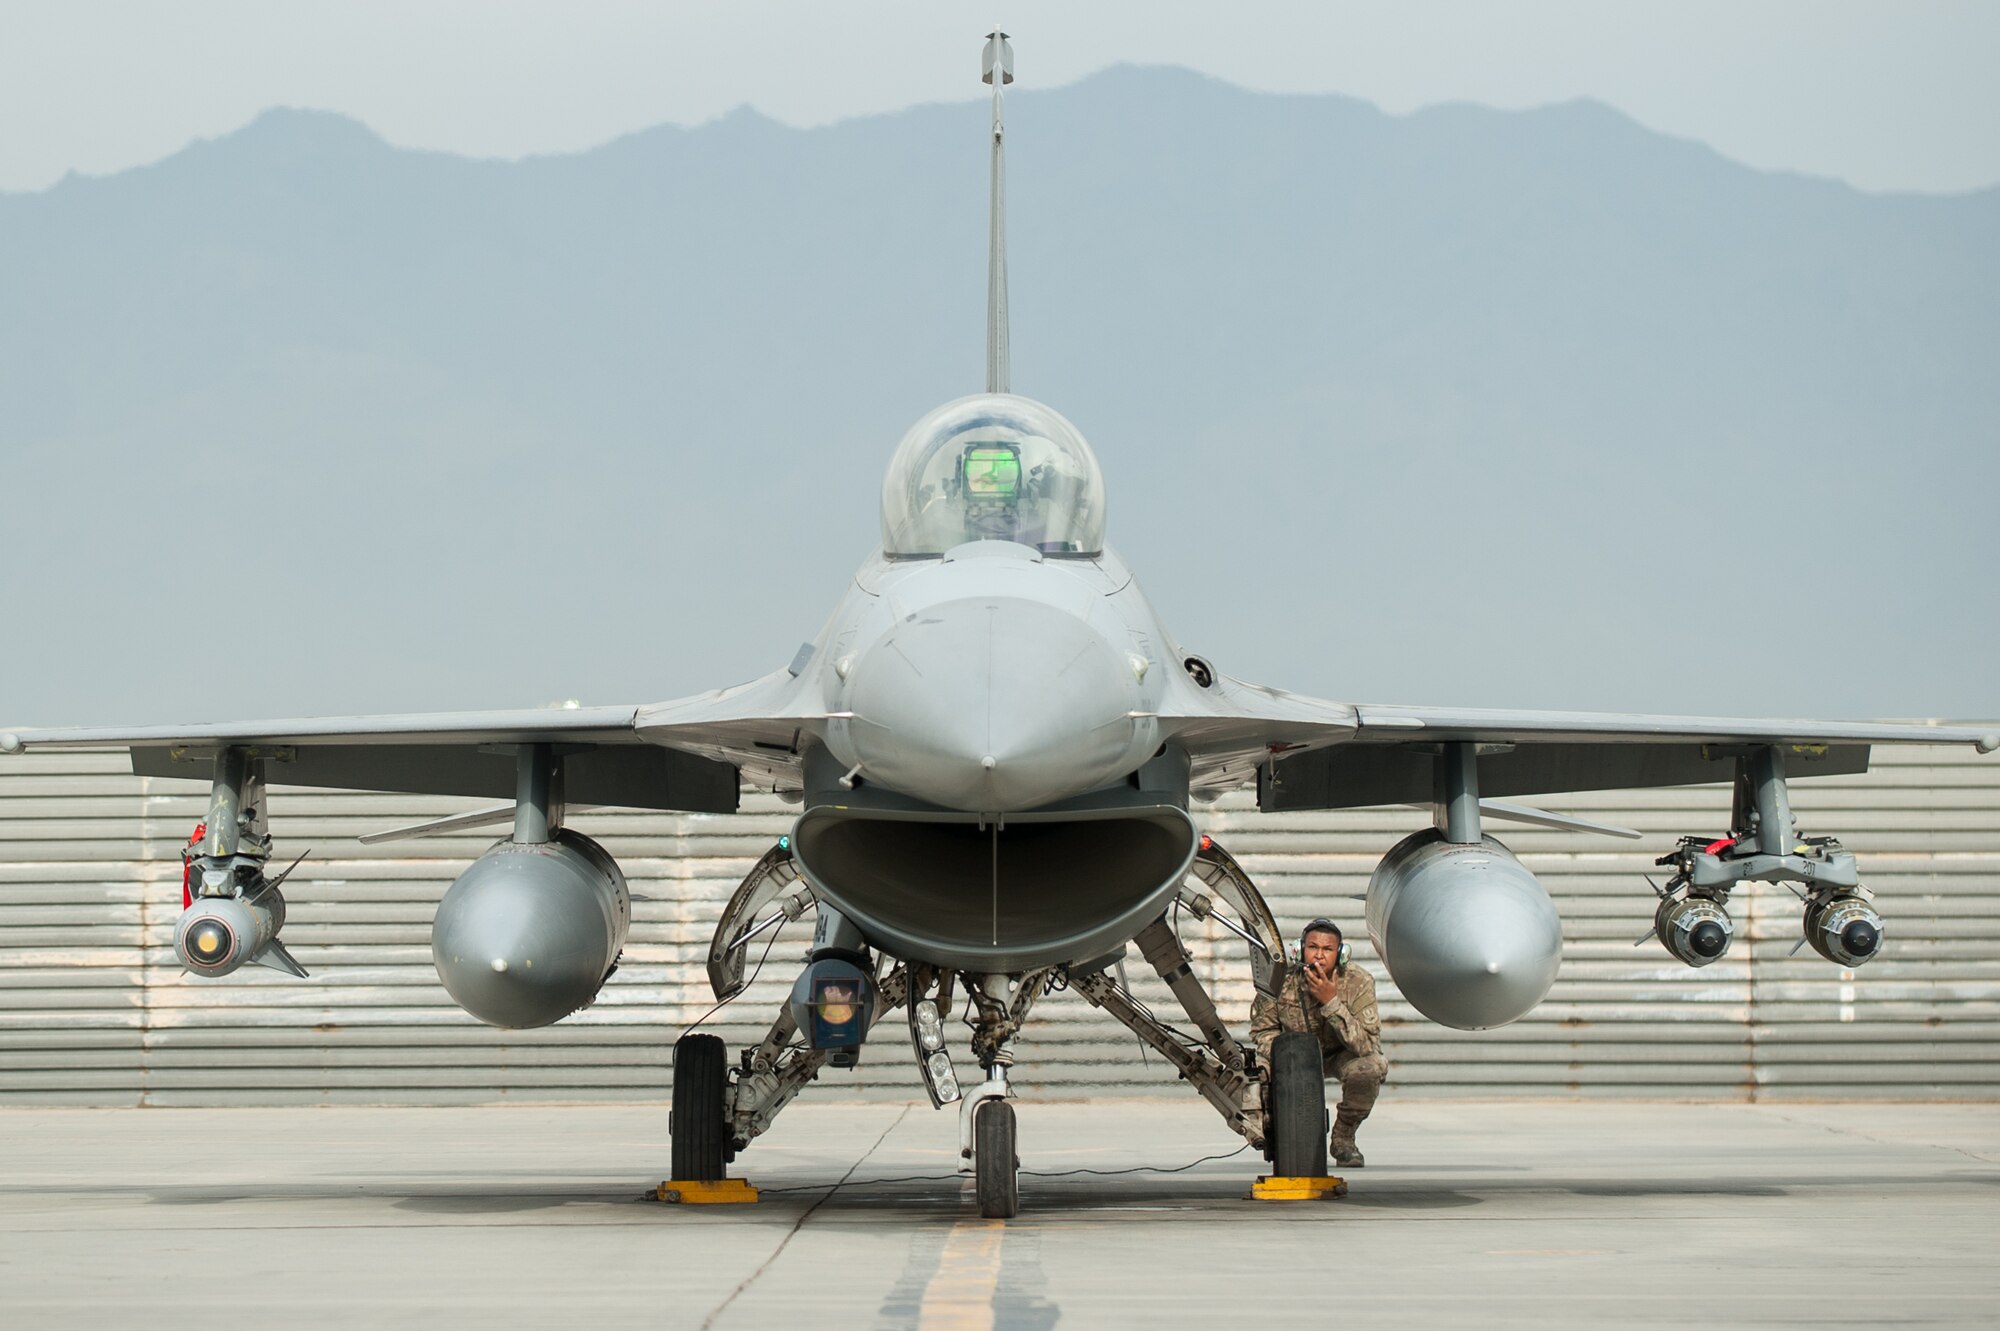 A U.S. Airman assigned to the 455th Expeditionary Maintenance Squadron and an F-16 Fighting Falcon pilot assigned to the 555th Expeditionary Fighter Squadron go over a pre-flight inspection before a combat sortie from Bagram Airfield, Afghanistan, Sept. 22, 2015. The F-16 is a multi-role fighter aircraft that is highly maneuverable and has proven itself in air-to-air and air-to-ground combat. (U.S. Air Force photo by Tech. Sgt. Joseph Swafford/Released)